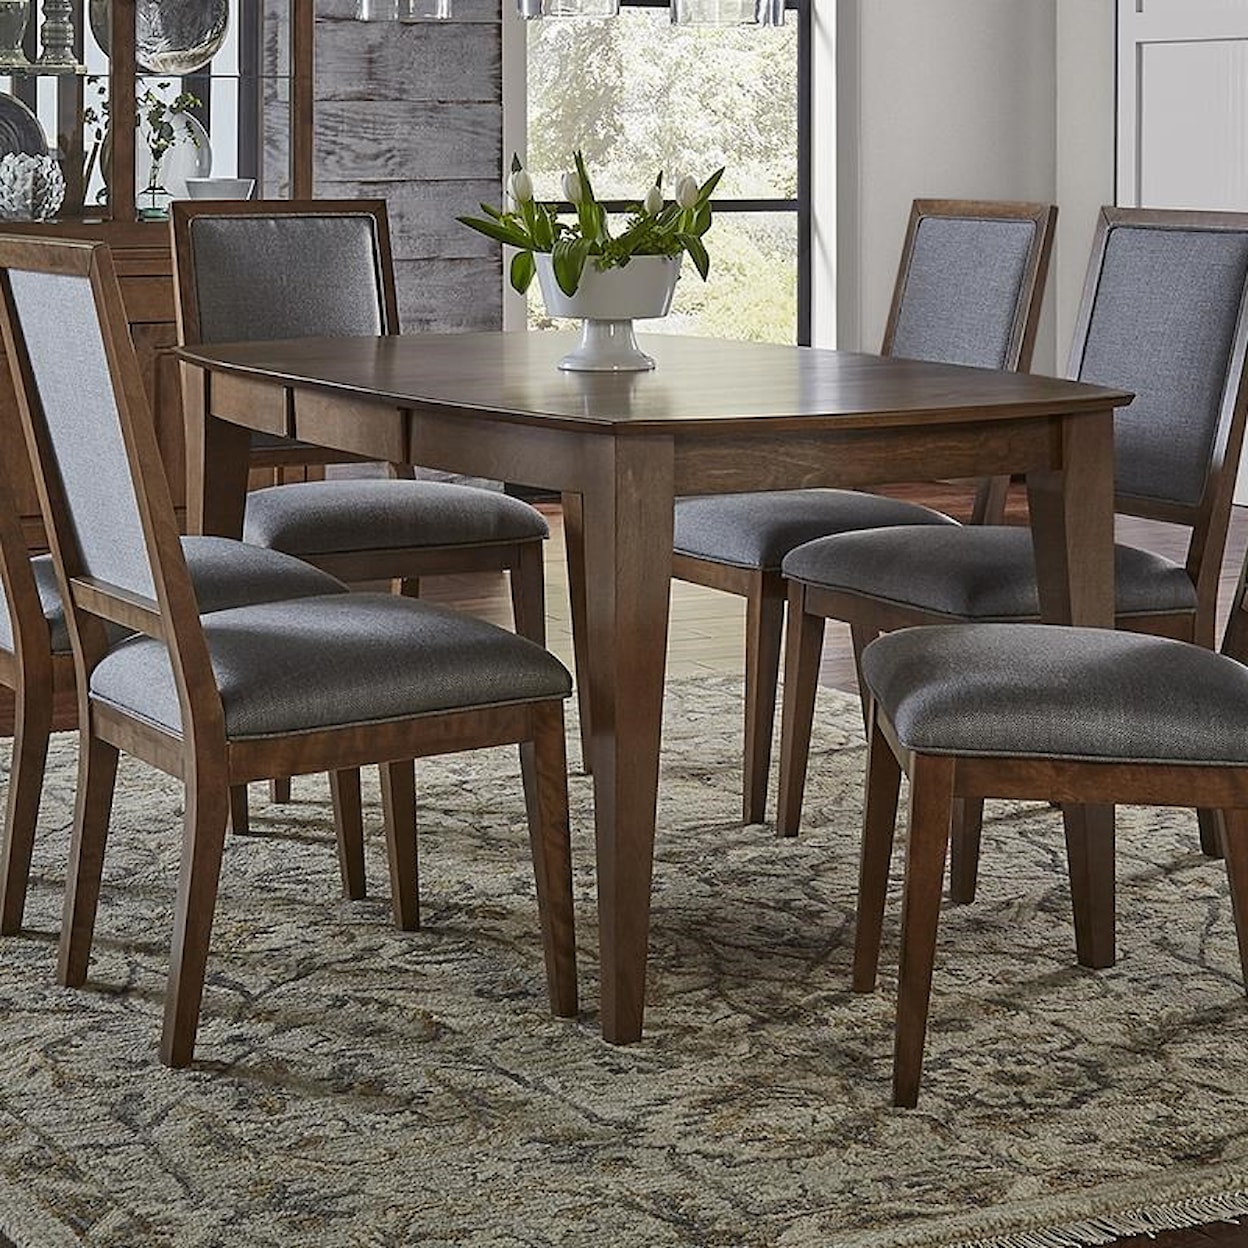 Canadel Pecan Washed Dining Table